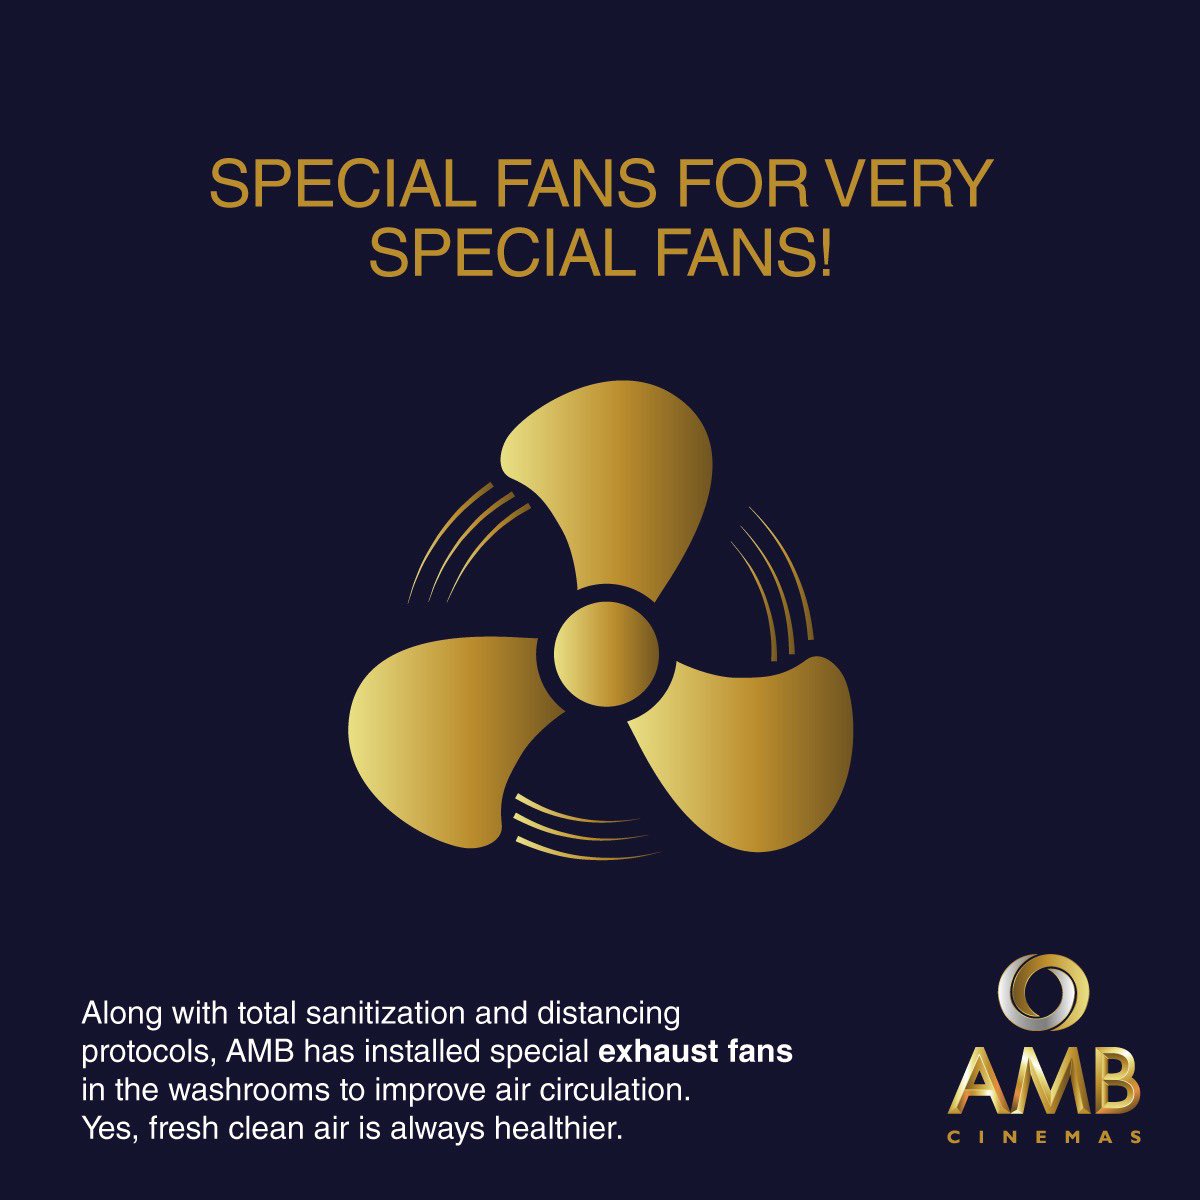 Little things do make a difference. We have installed special exhaust fans in the washrooms to improve air circulation. Clean air is always healthier! #SpecialFans #ExhaustFans #AirCirculation #FreshCleanAir #AMBCinemas